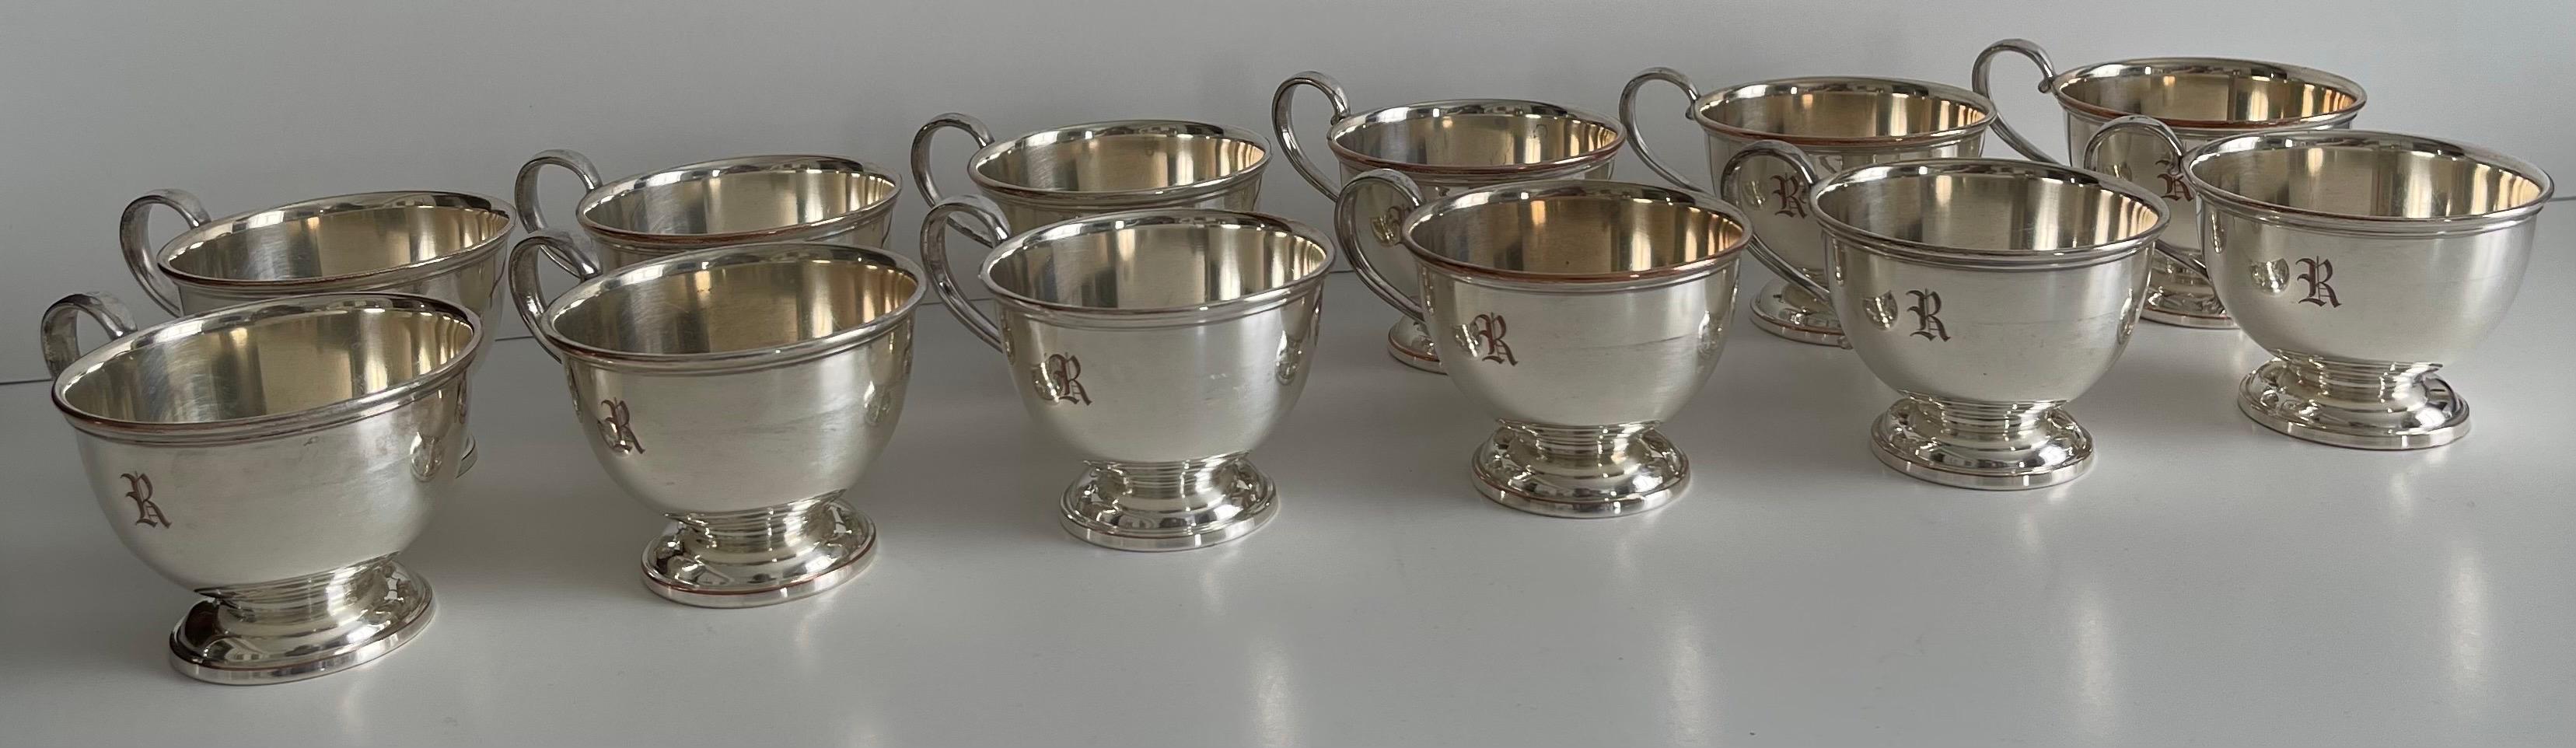 Silver Plate Silver R Monogram Punch Cups, Set of 12 For Sale